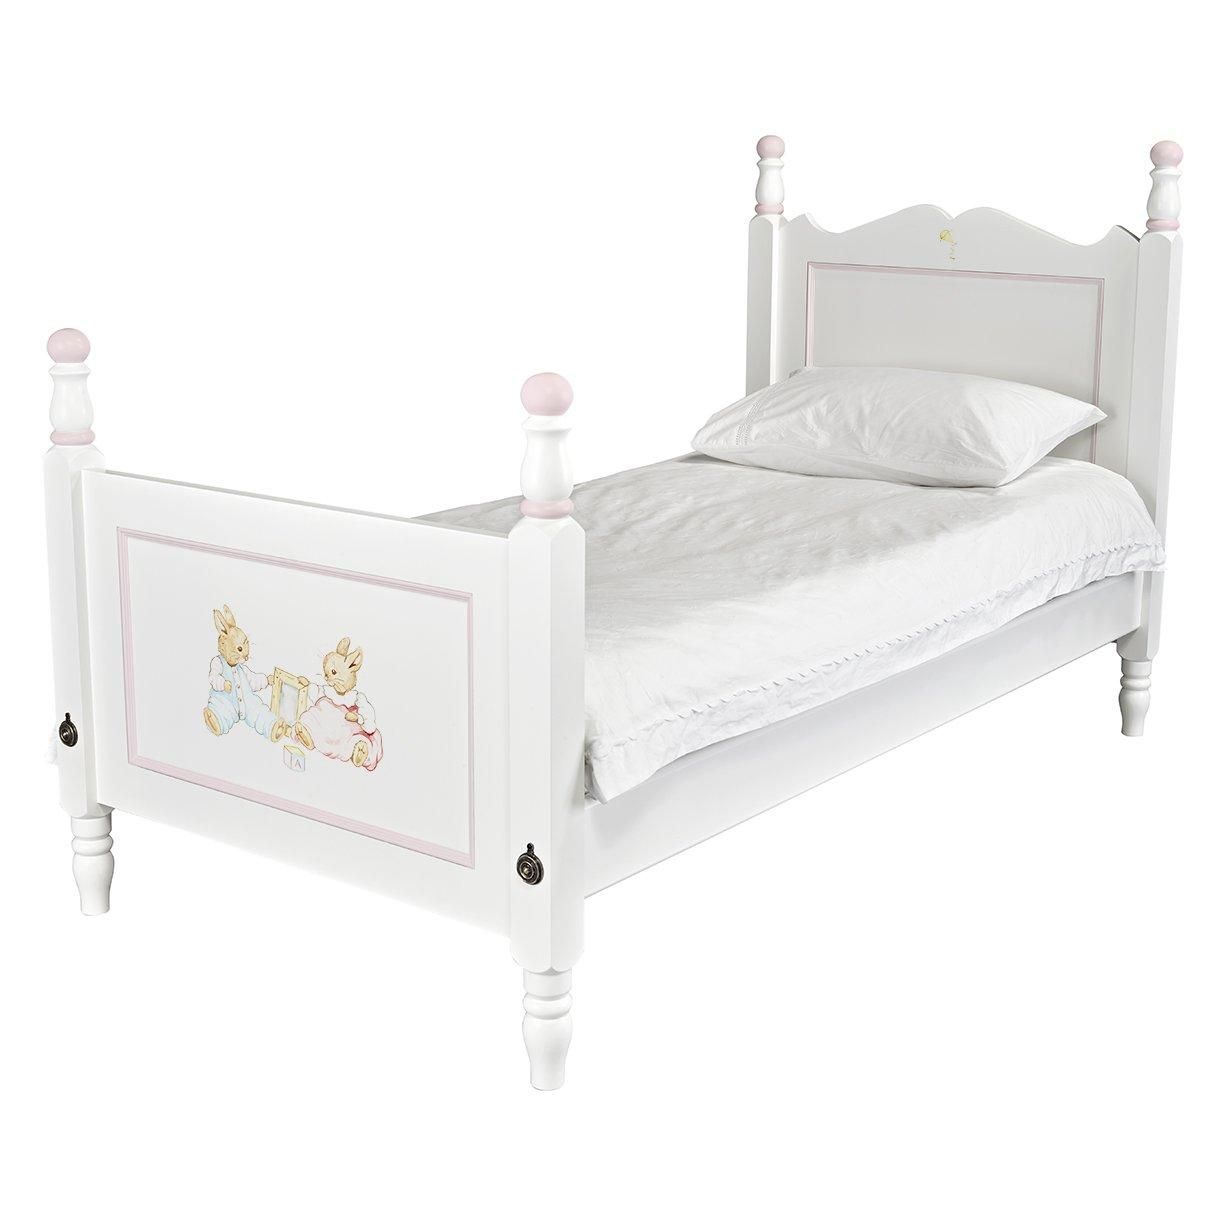 Single William Bed - Barbara’s Bunnies with Dragons Pink Trim